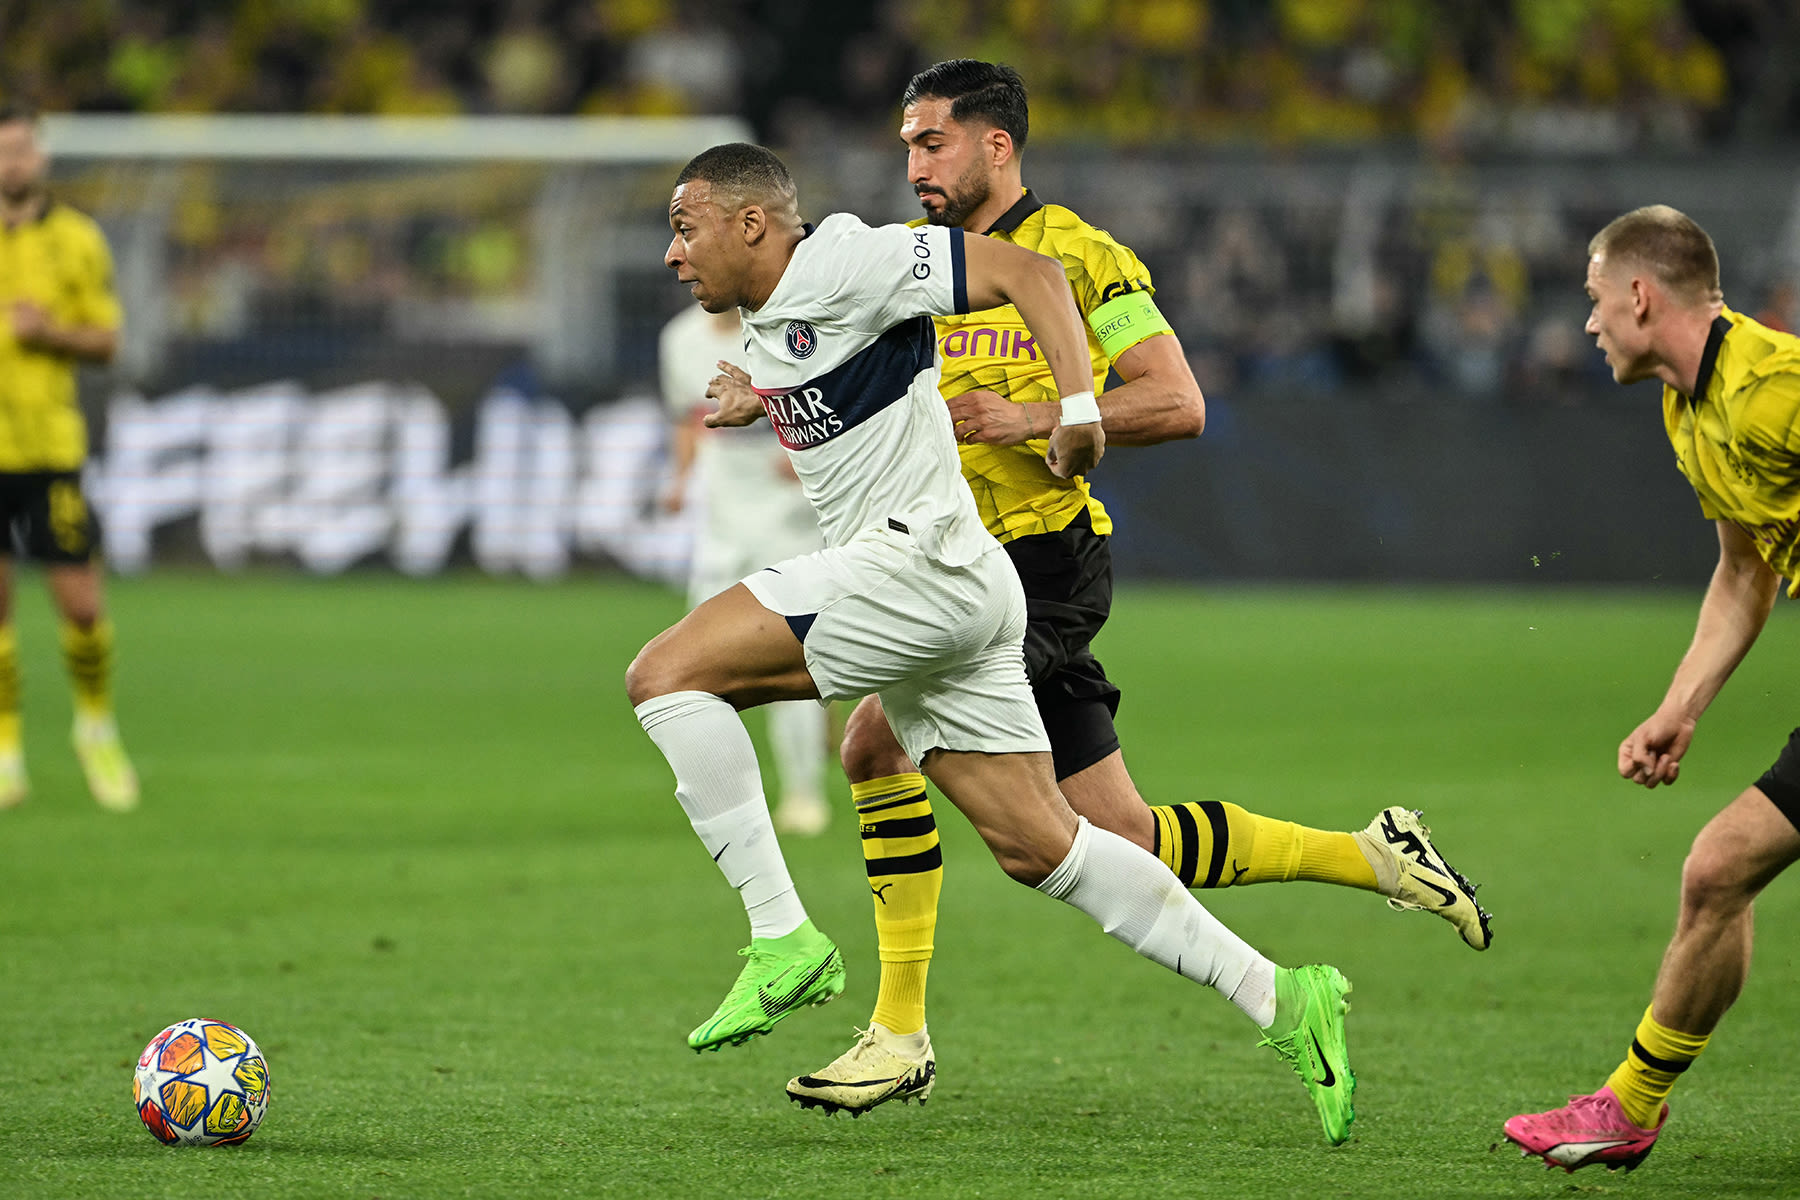 How to Watch the PSG vs. Dortmund Champions League Semifinal Game in the U.S.